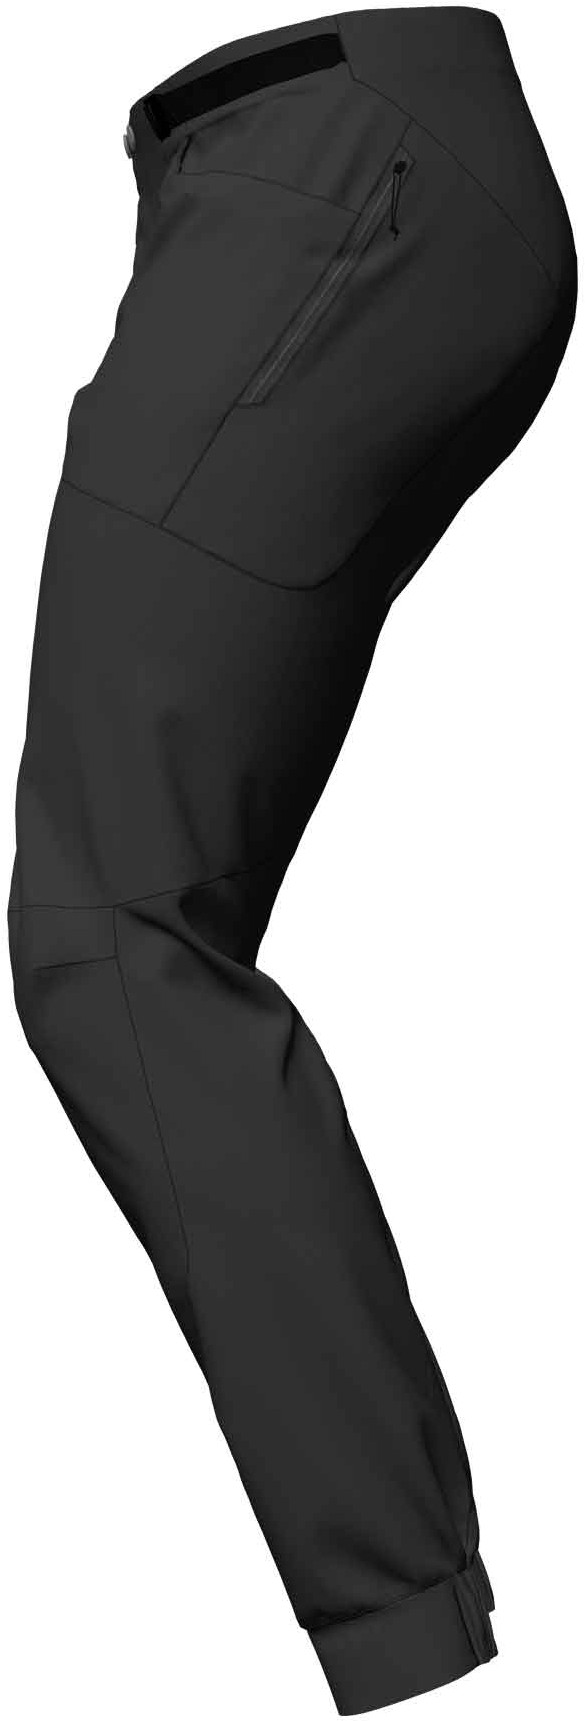 Glidepath Trousers image 1